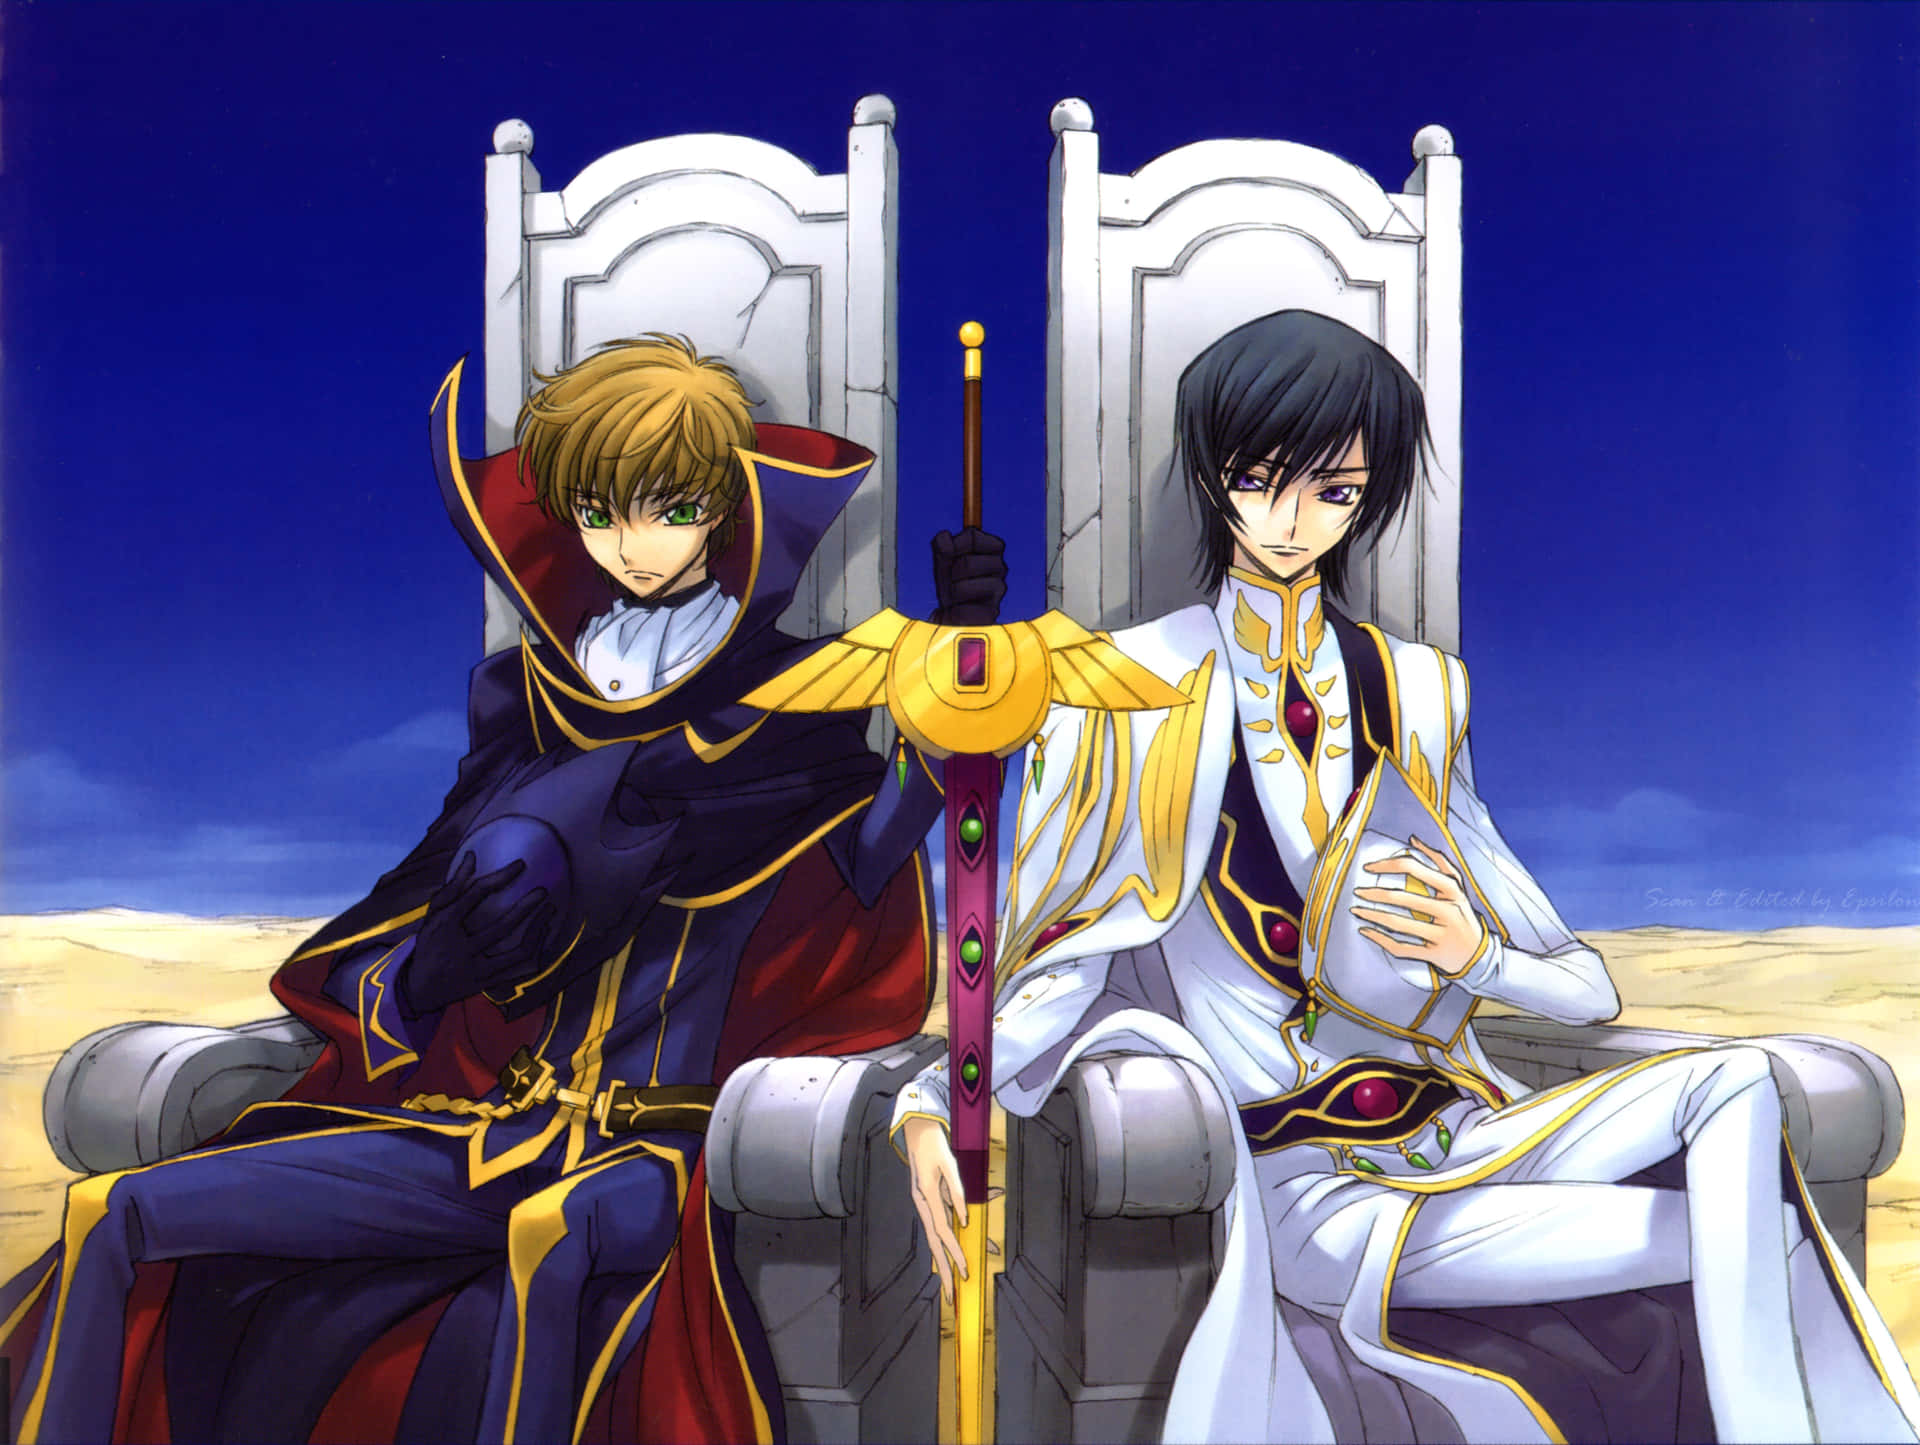 Conquer Your Fears in the World of Code Geass